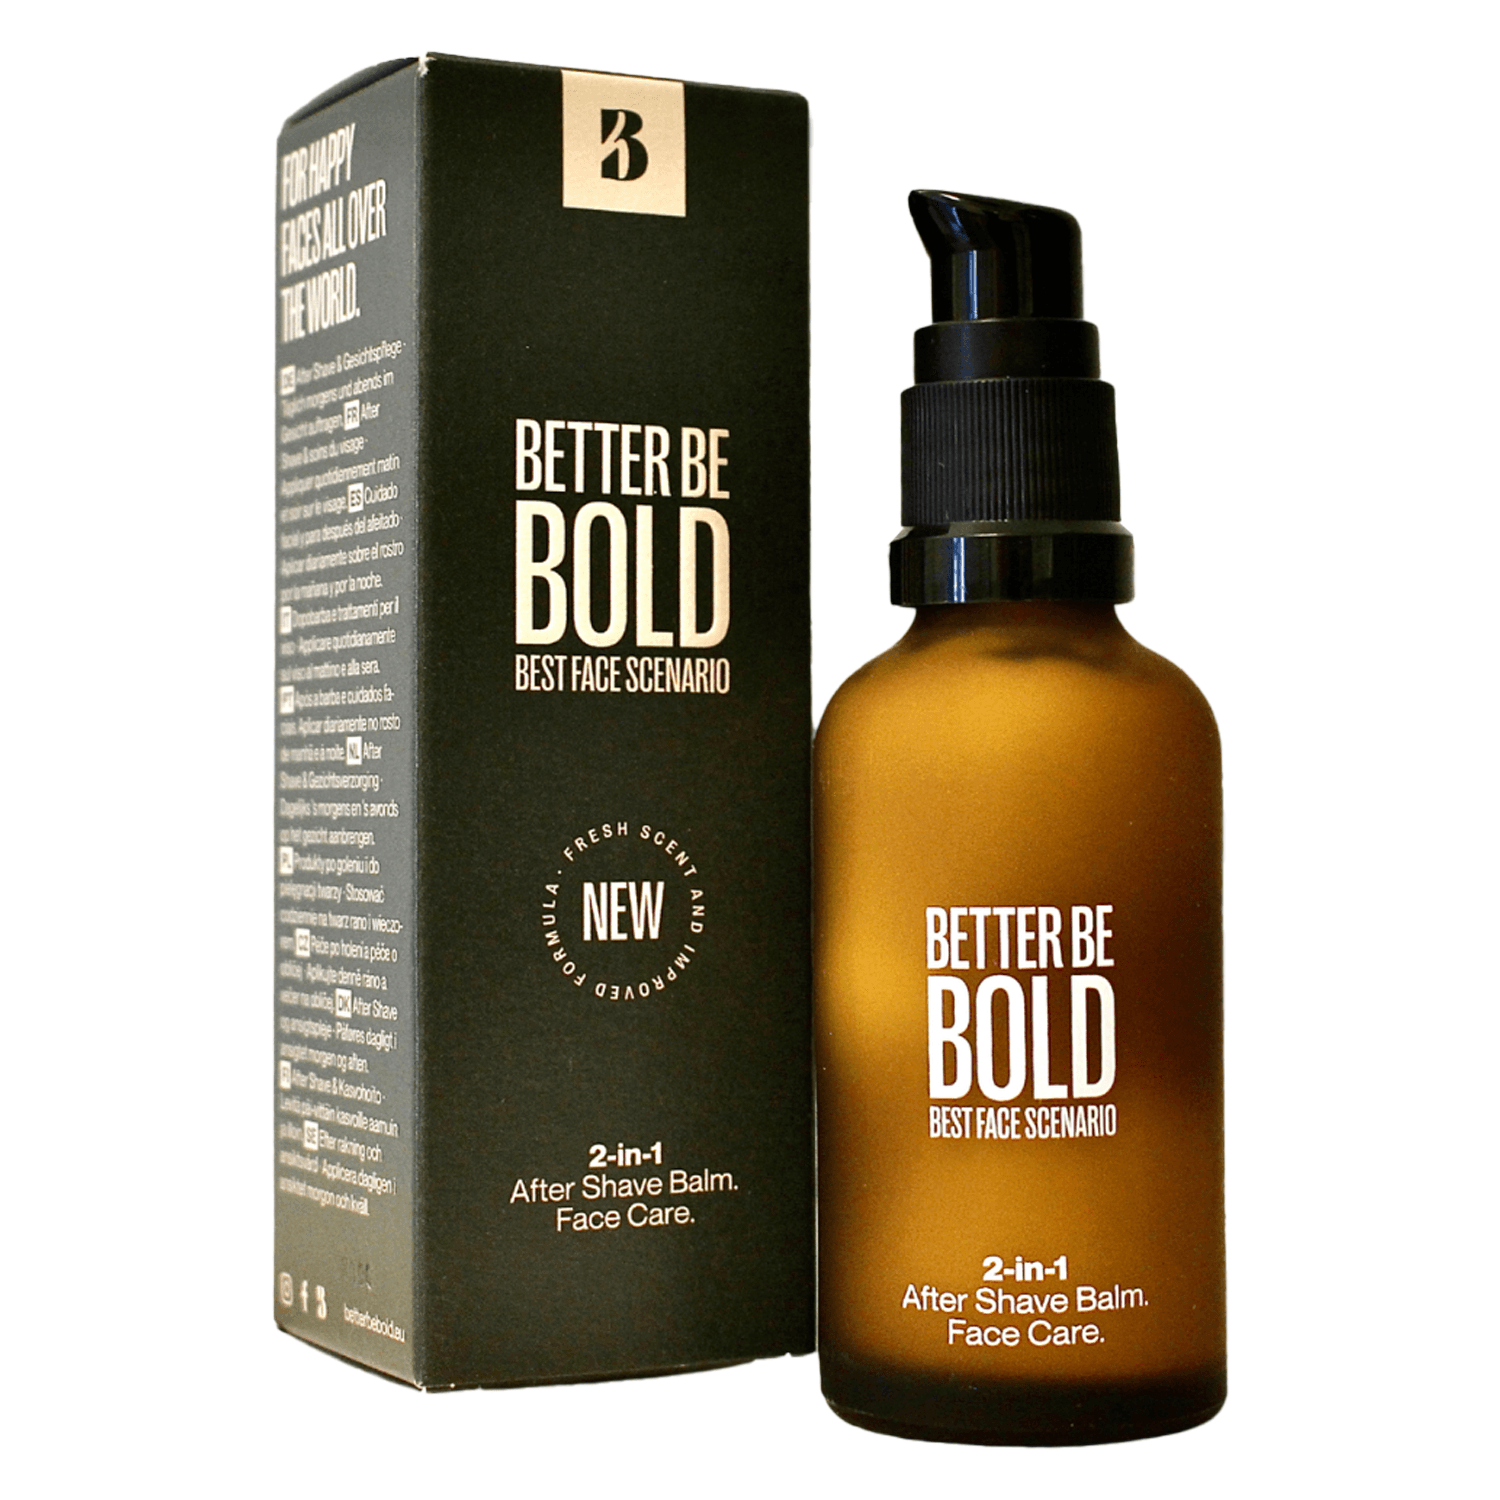 Product image from BETTER BE BOLD - 2-in-1 After Shave Balm & Gesichtscreme